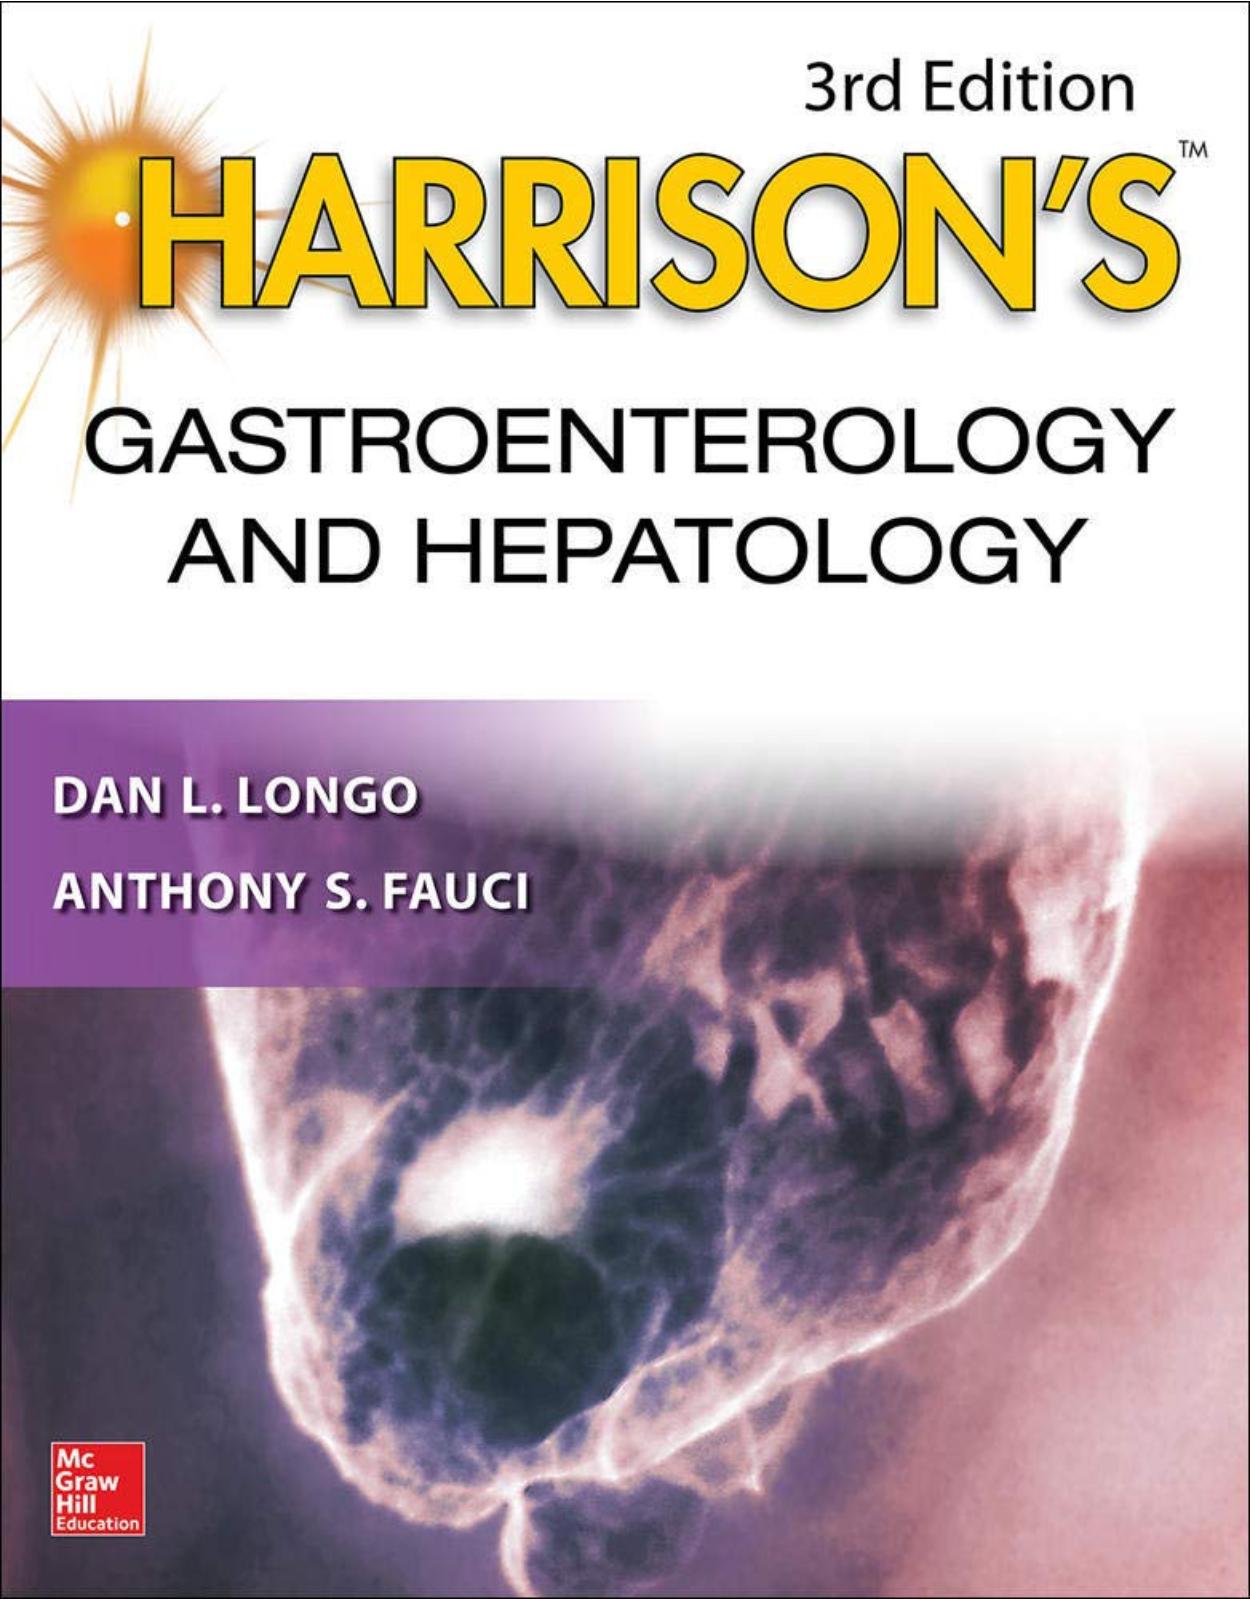 Harrison's Gastroenterology and Hepatology, 3rd Edition (Harrison's Specialty)